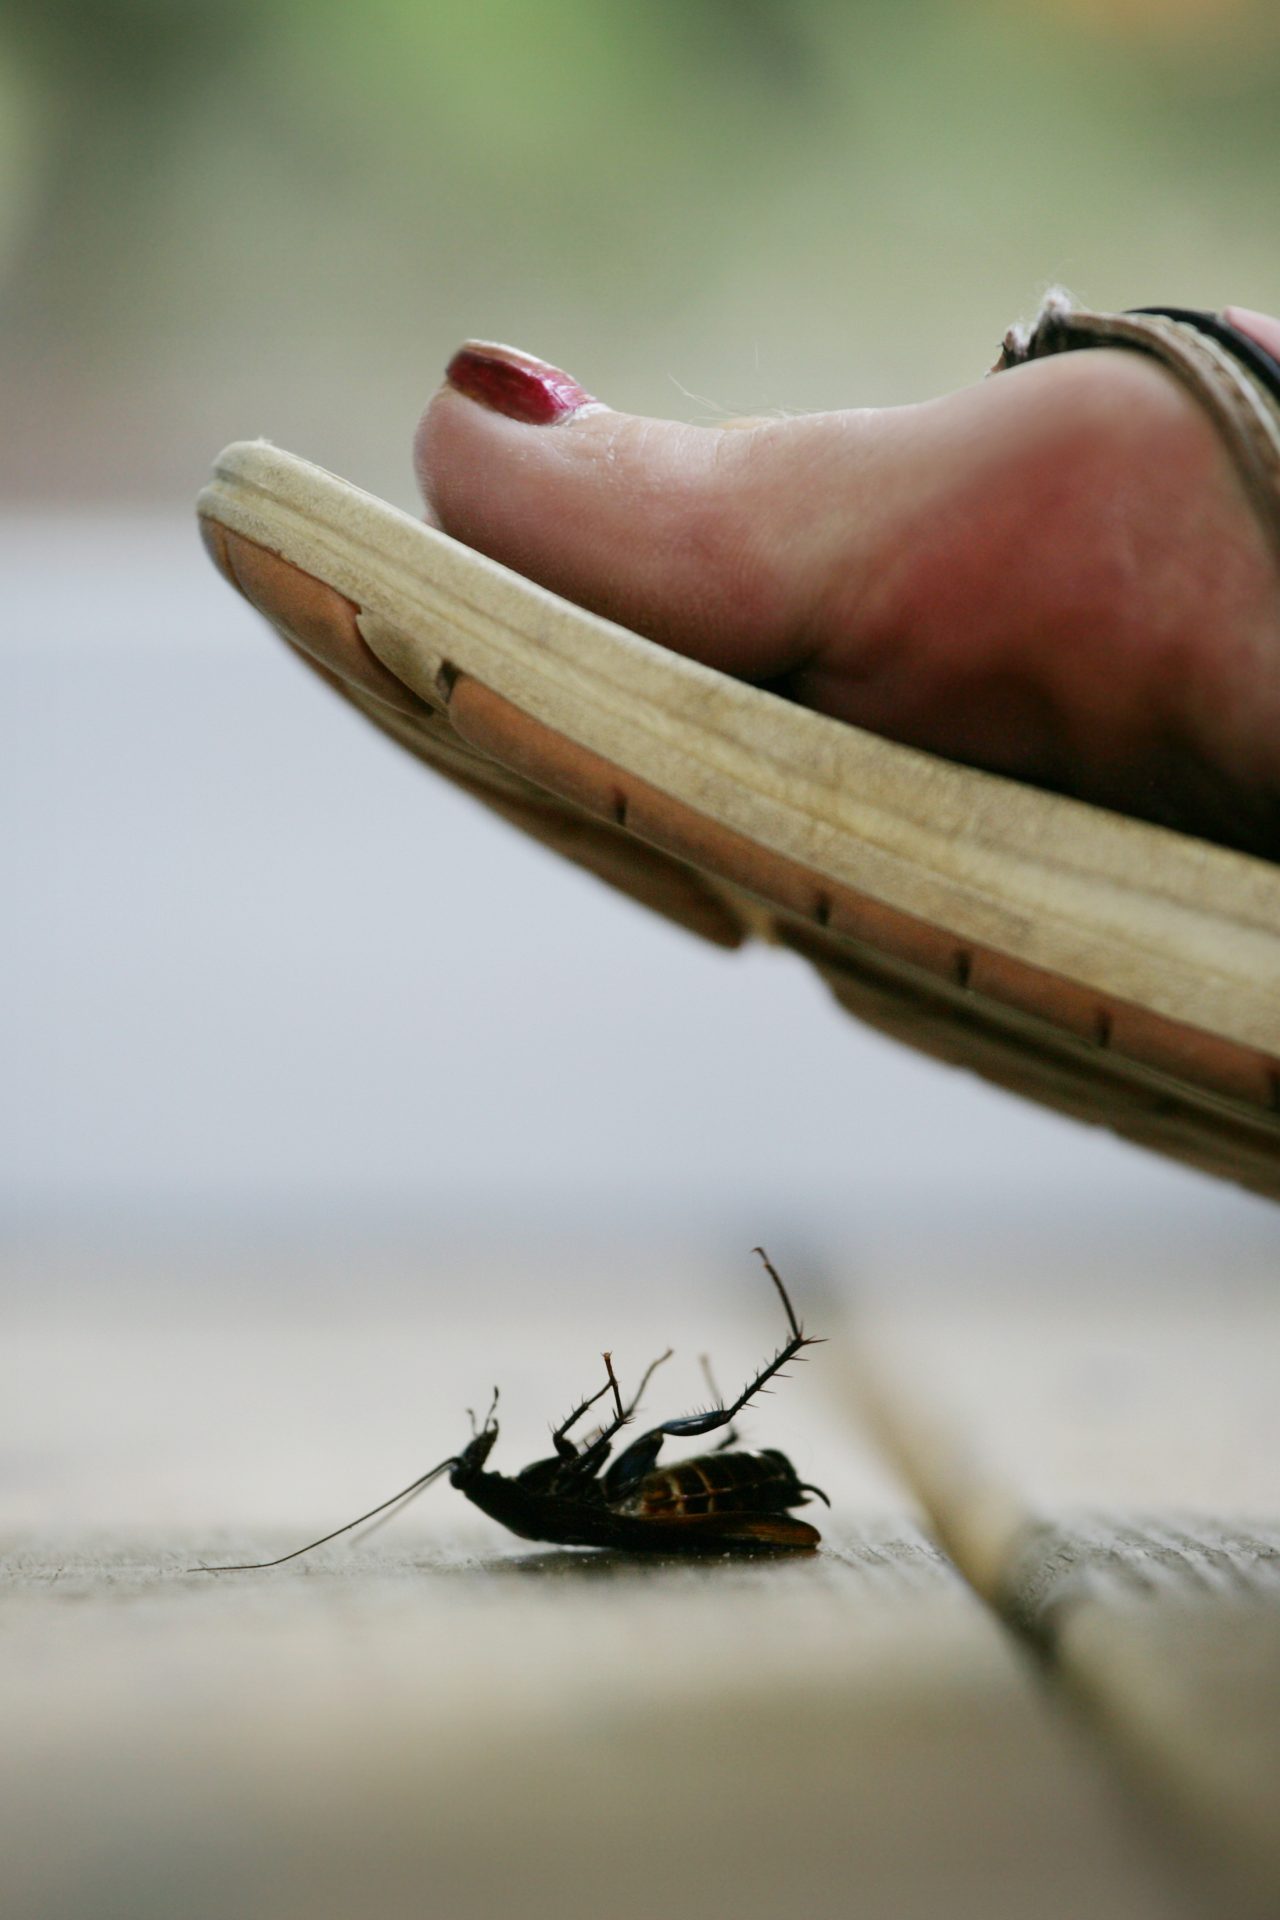 Don't step on that roach! It can be a hazard to your health